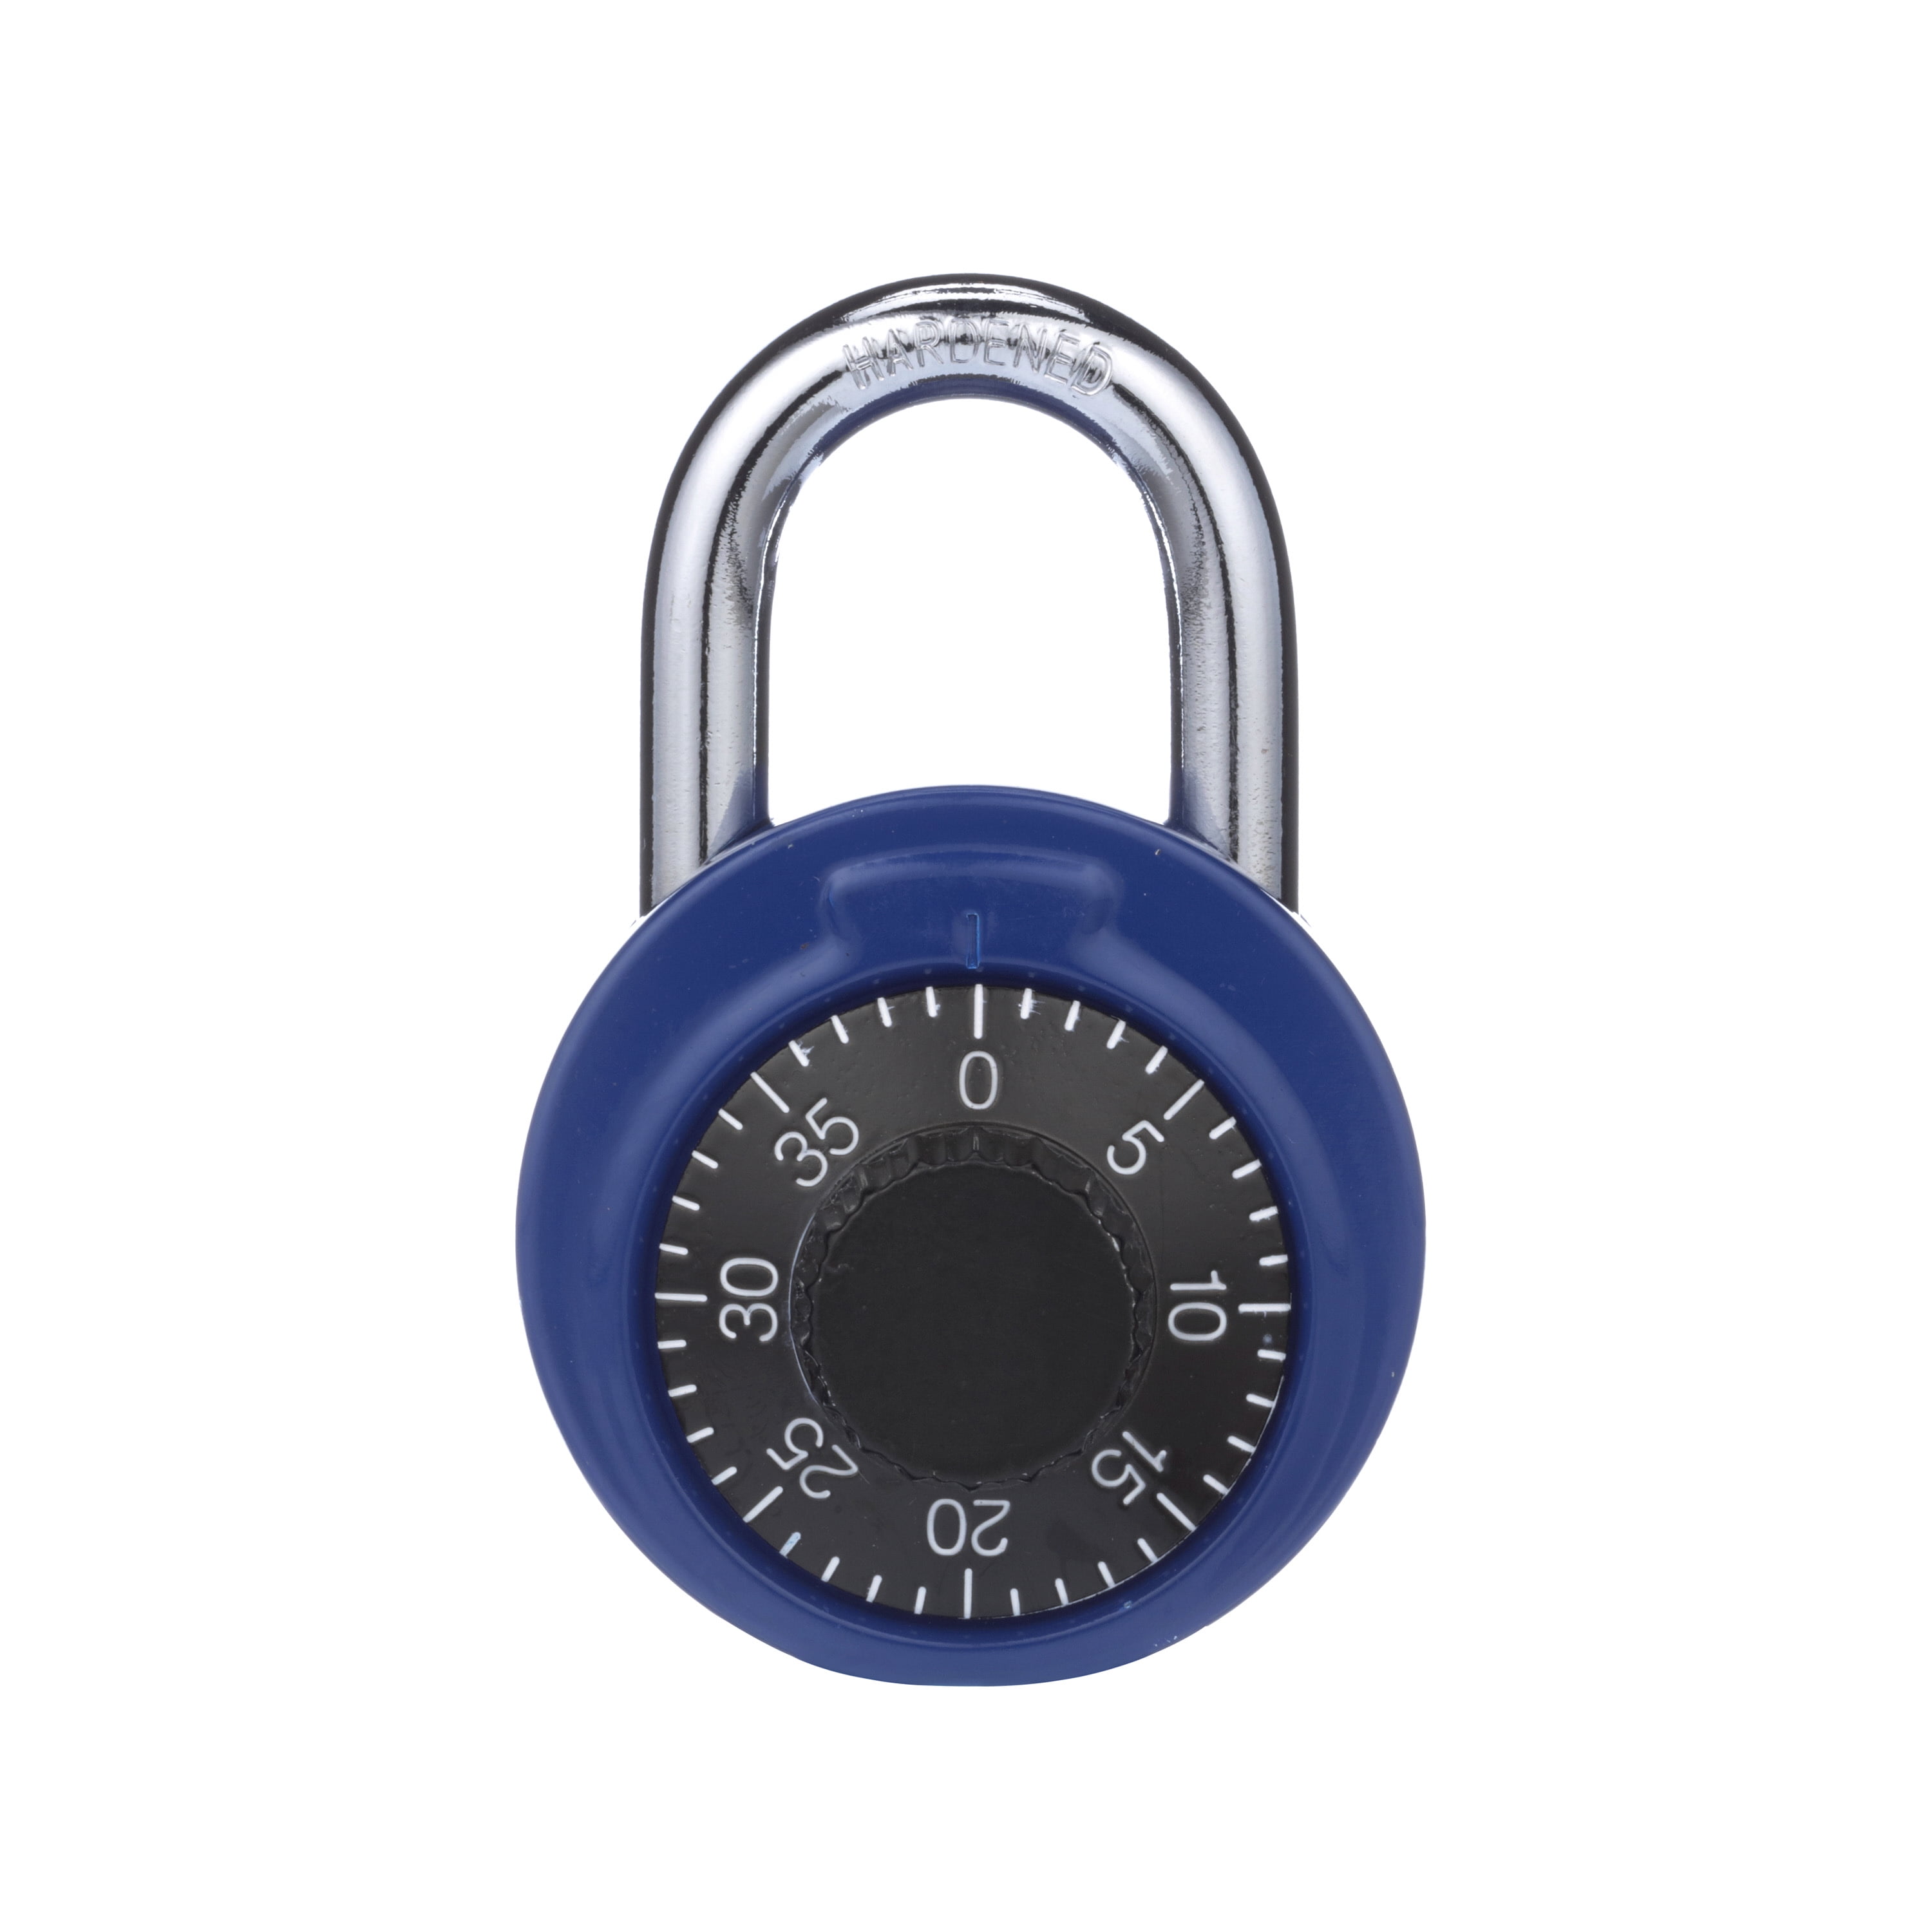 High Quality Brinks, 48mm Combination Dial Padlock, Blue